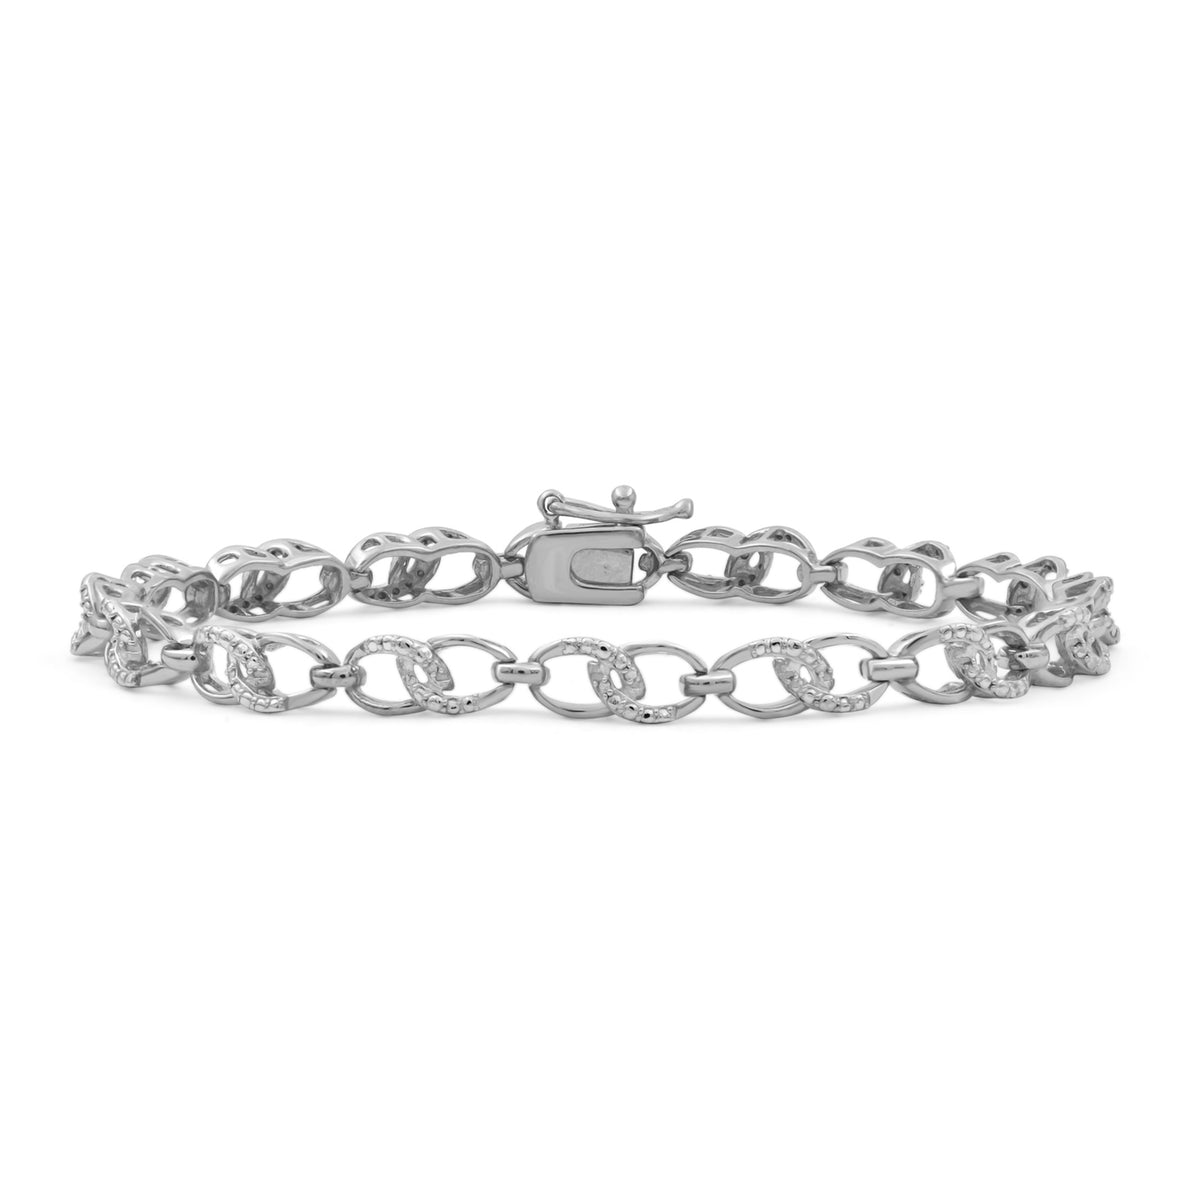 Accent White Diamond Sterling Silver Leaf Bracelet - Assorted